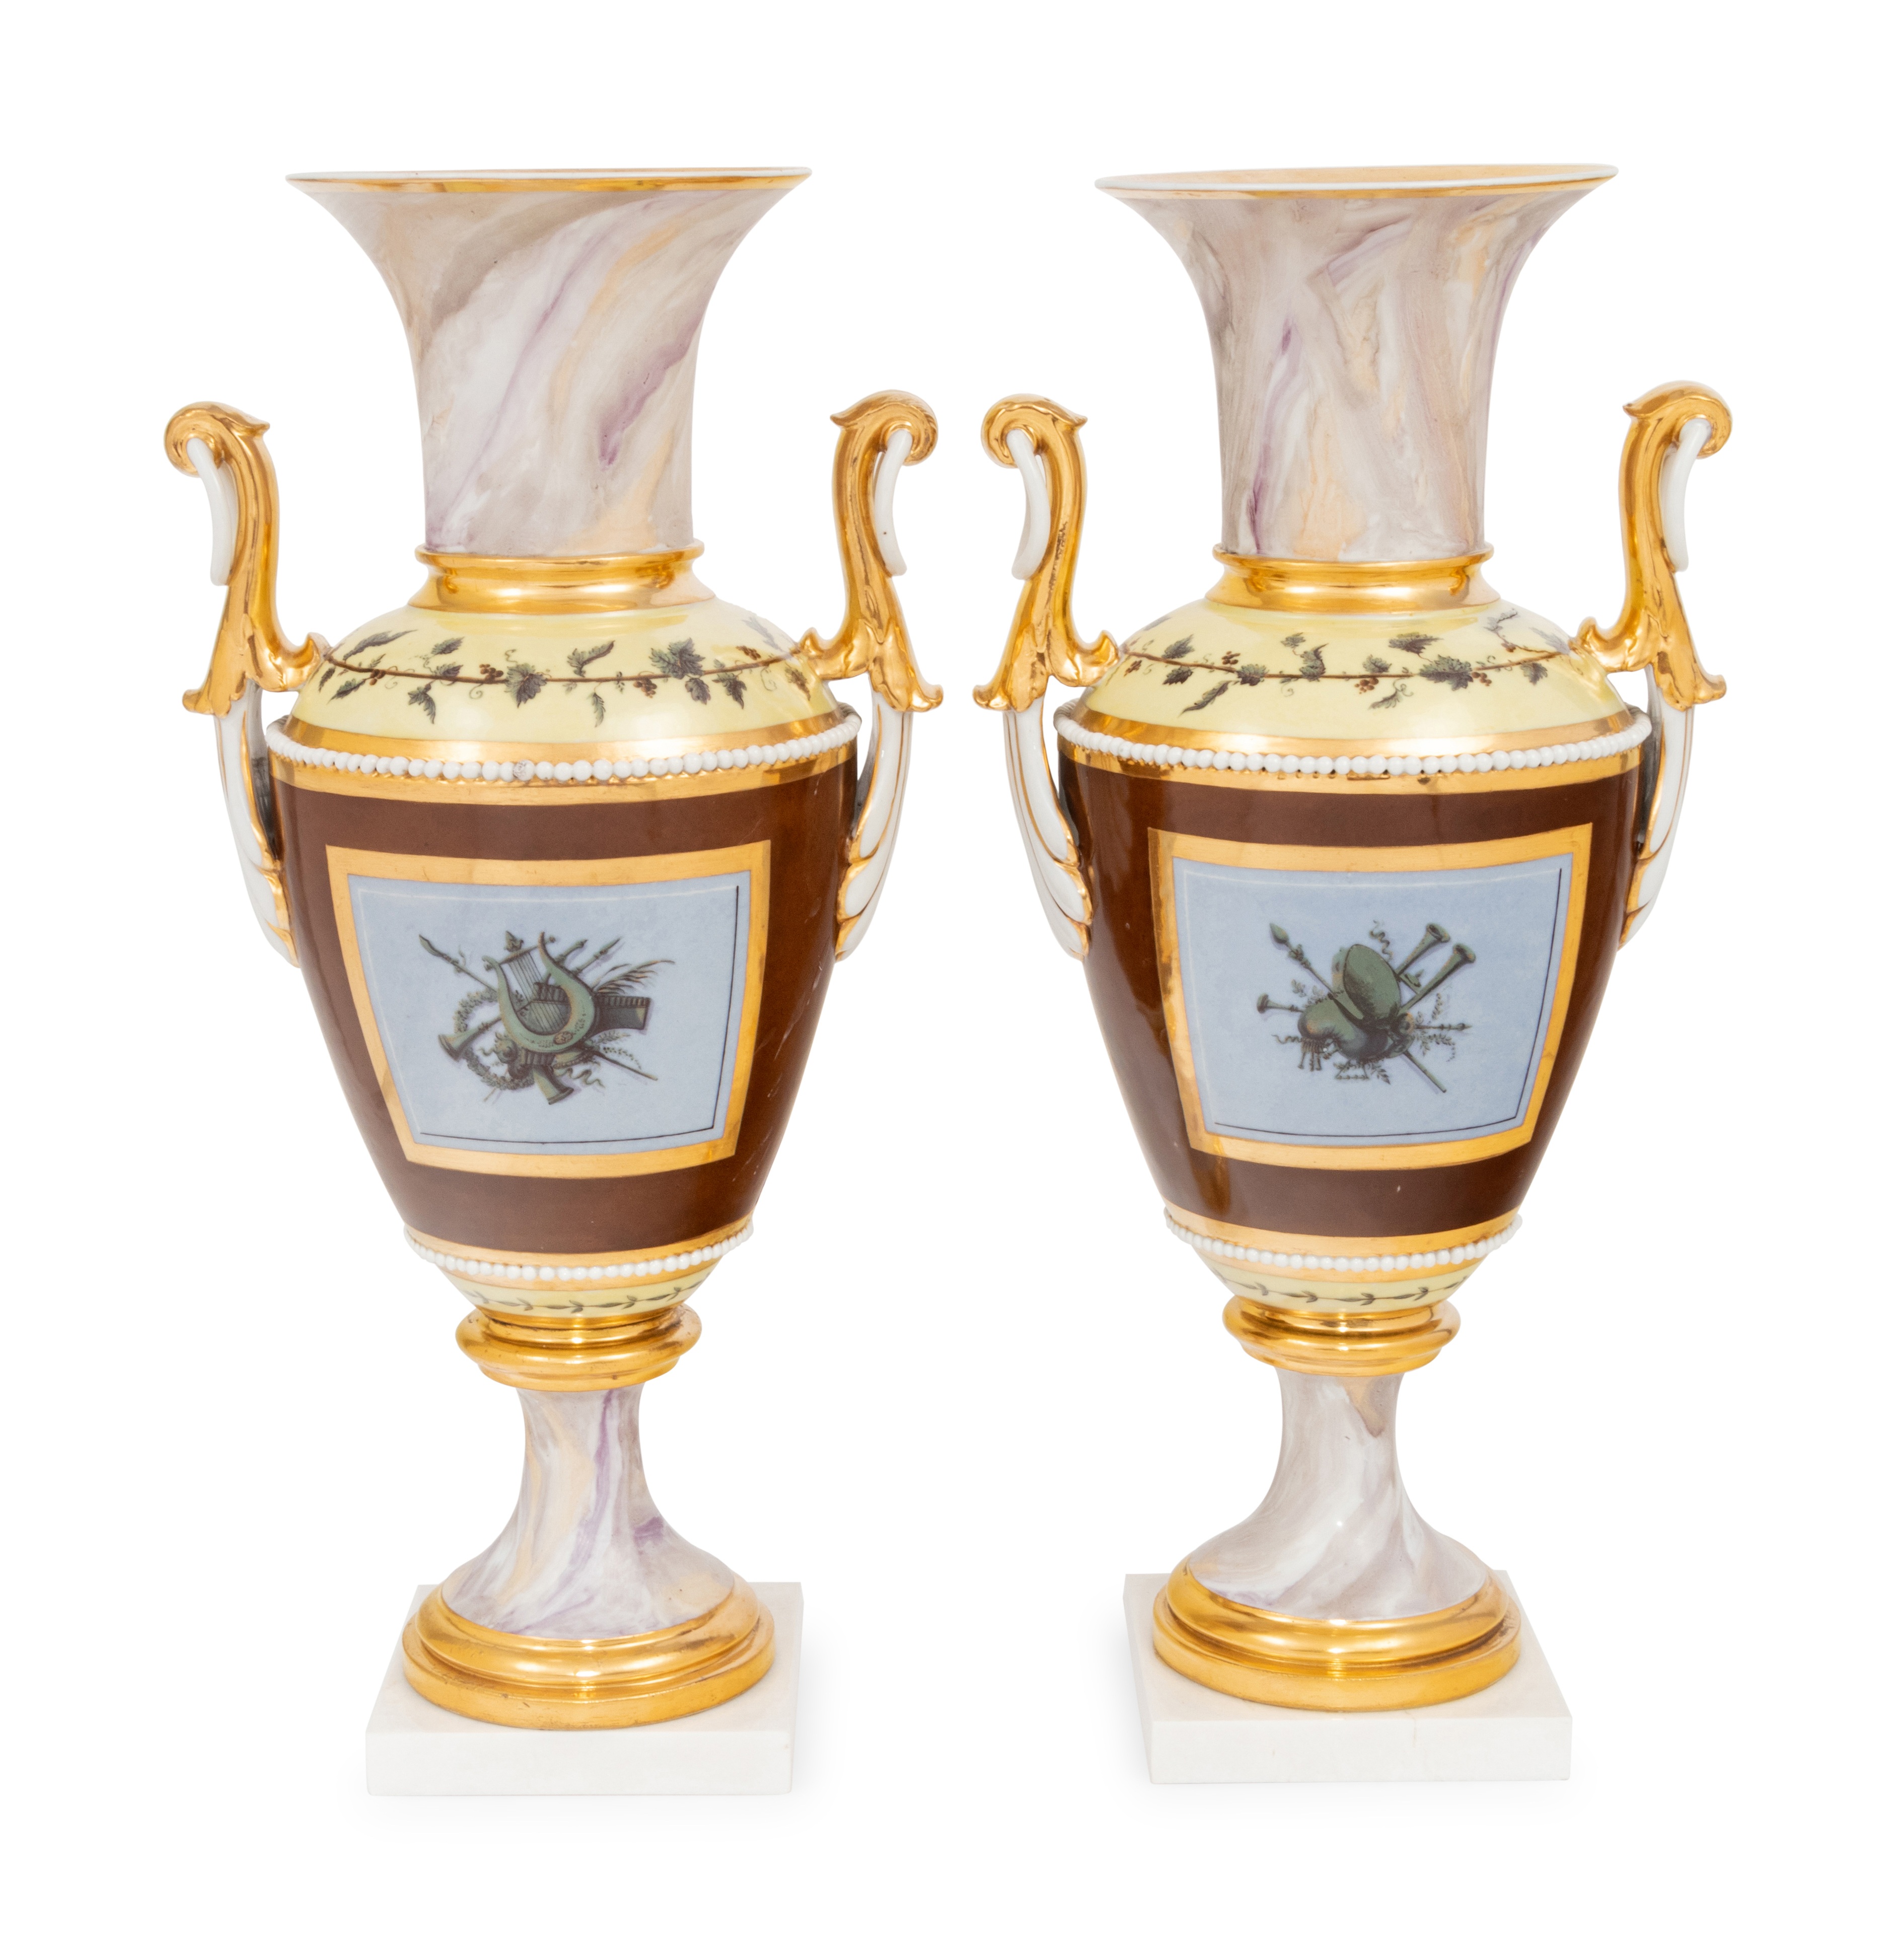 A Pair of Continental Faux Marble, Yellow and Chocolate Brown-Ground Porcelain Vases - Image 3 of 8